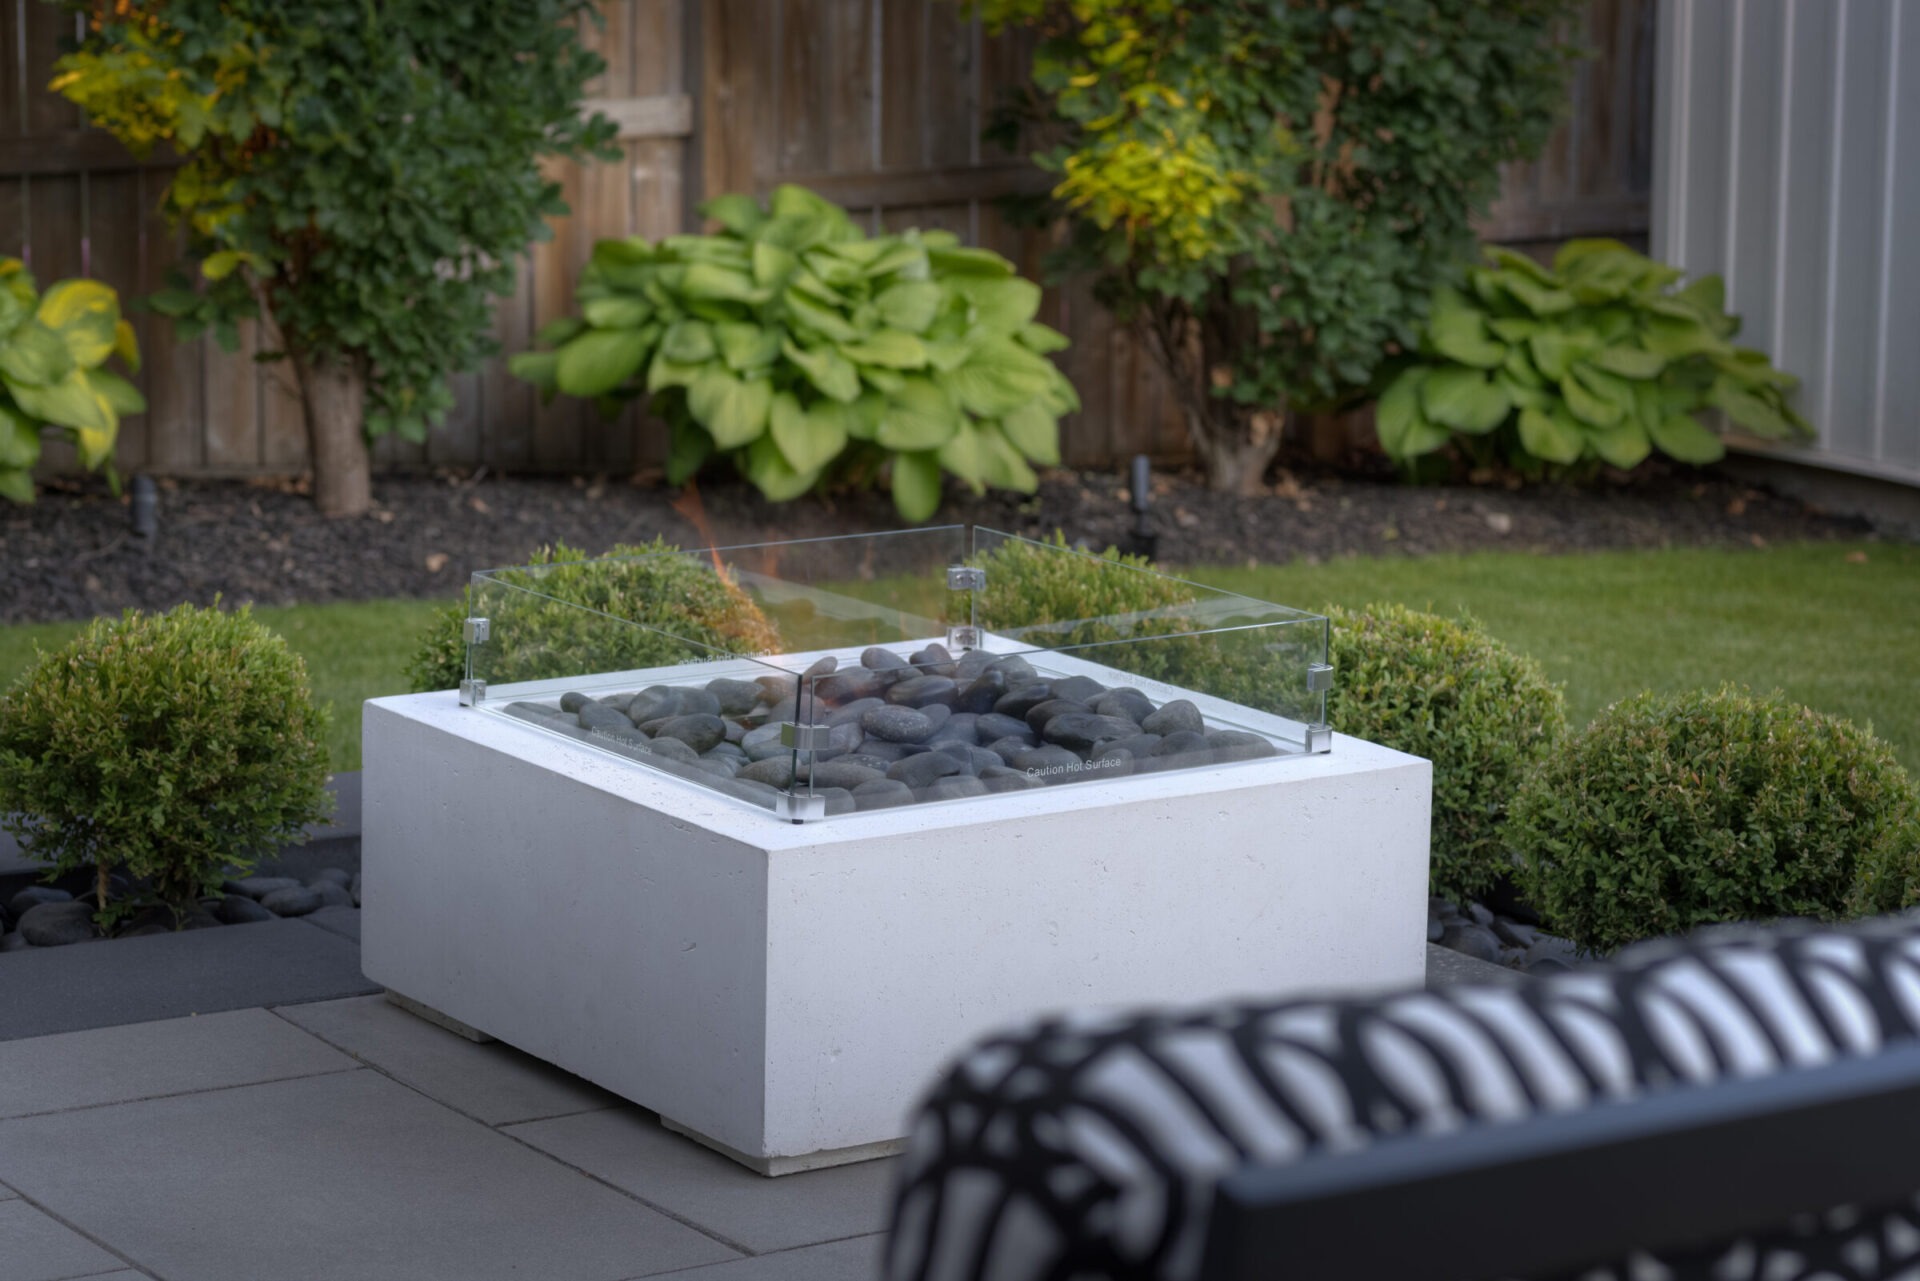 A modern outdoor fire pit with glass shield and smooth stones inside, located in a neatly landscaped garden with shrubs, foliage, and a wooden fence.